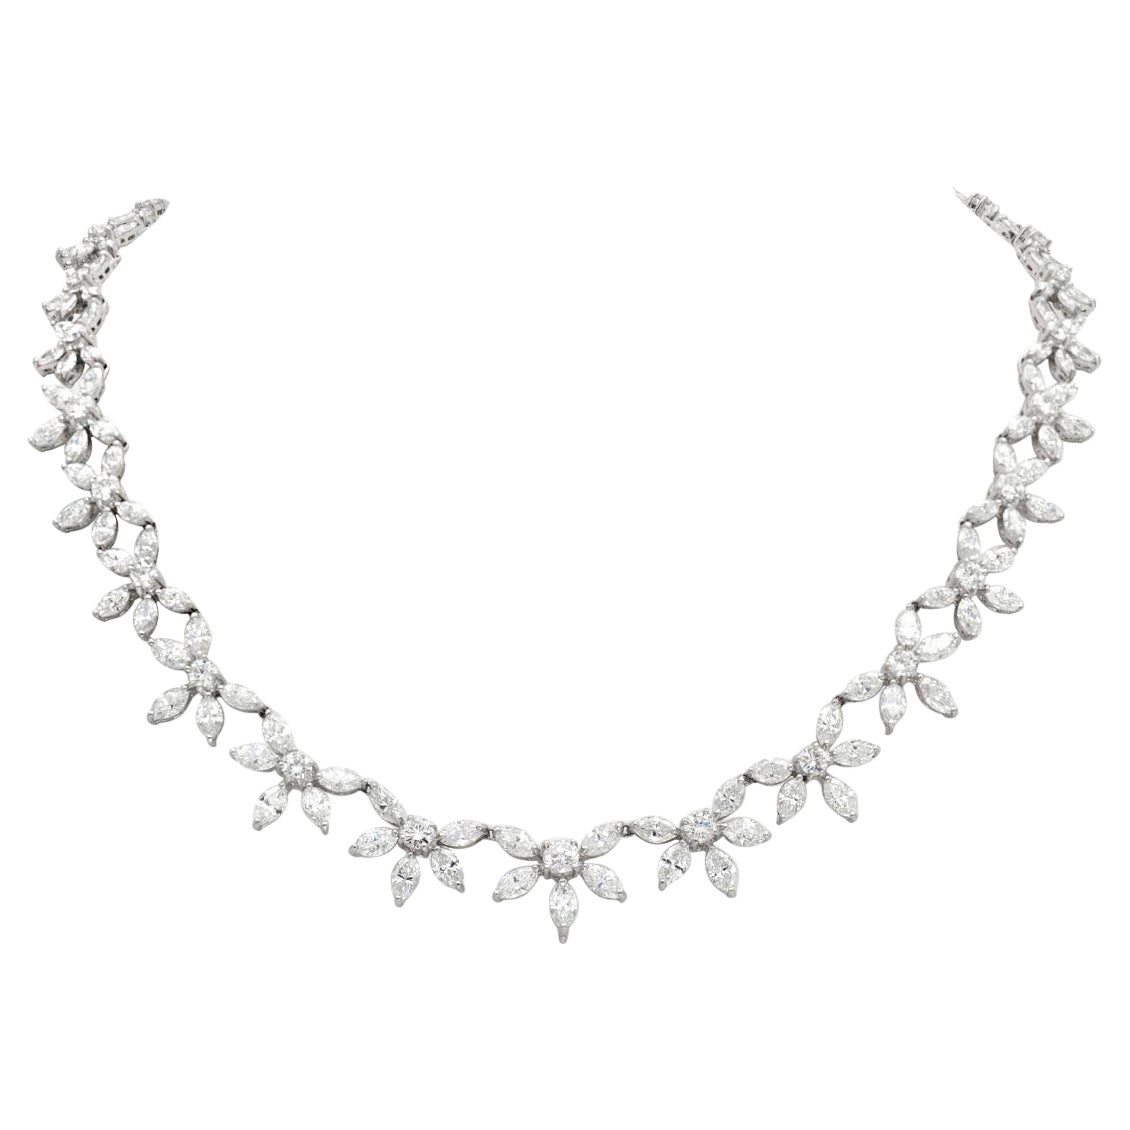 1950s 35.10 Carat Round and Marquise Cut Diamond Necklace